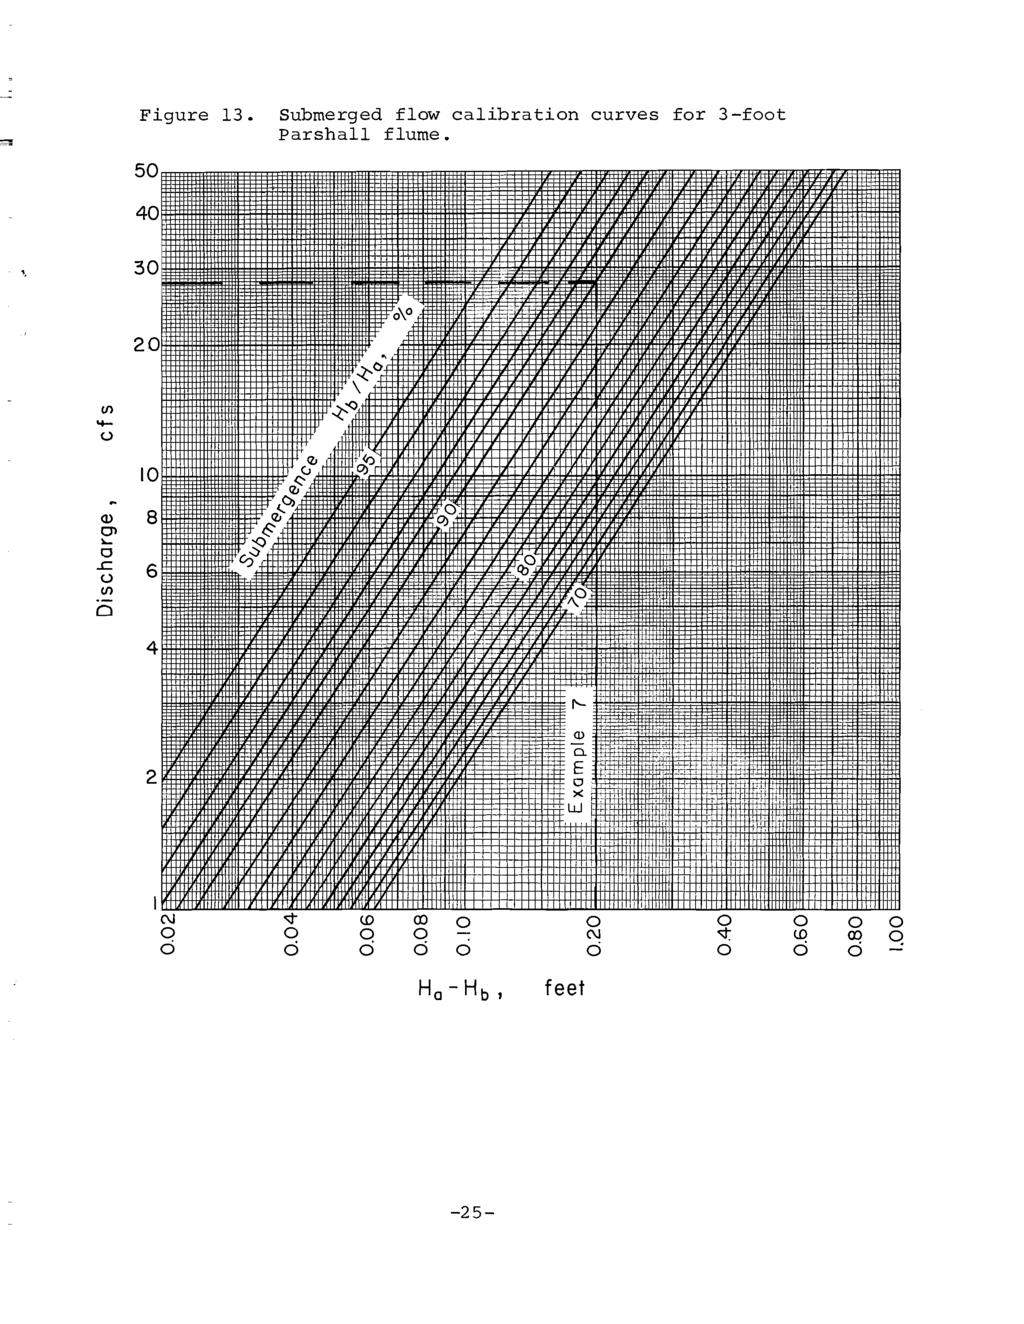 Figure 13. Submerged flow calibration curves for 3-foot Parshall flume. 4 3 2 (/) -u 1 <l) '1 lo.